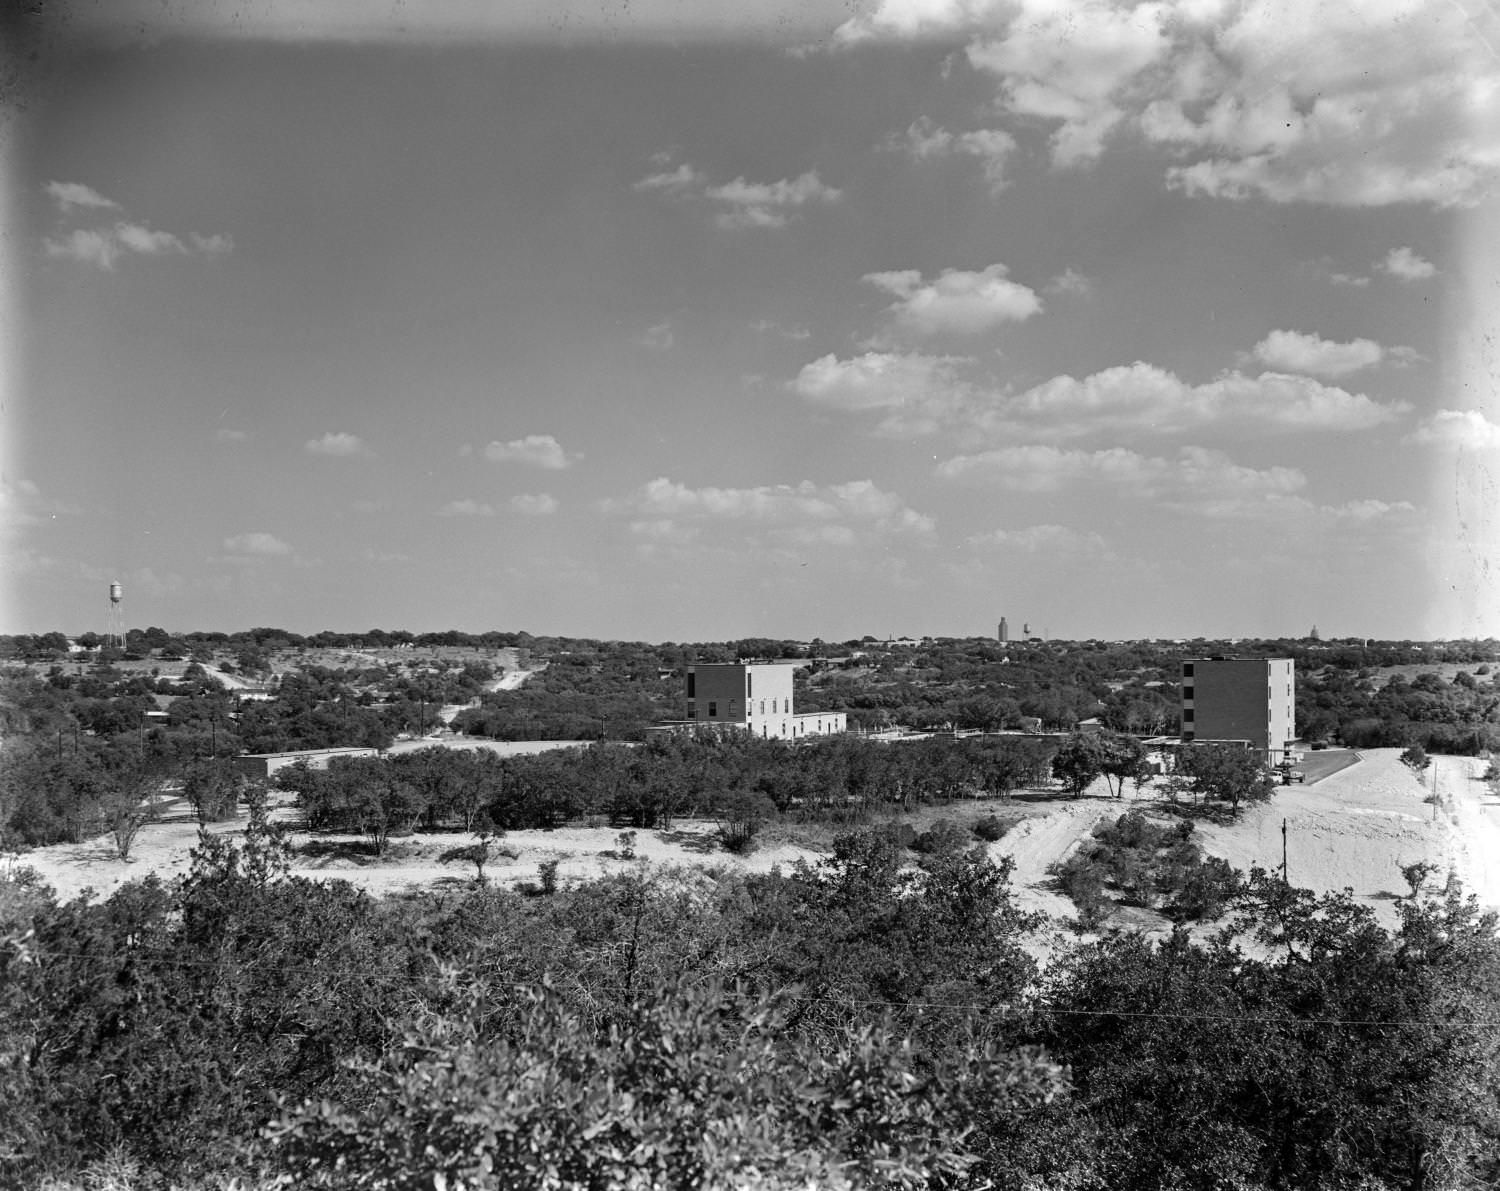 Buildings on a hill northwest of downtown Austin, Texas, 1955